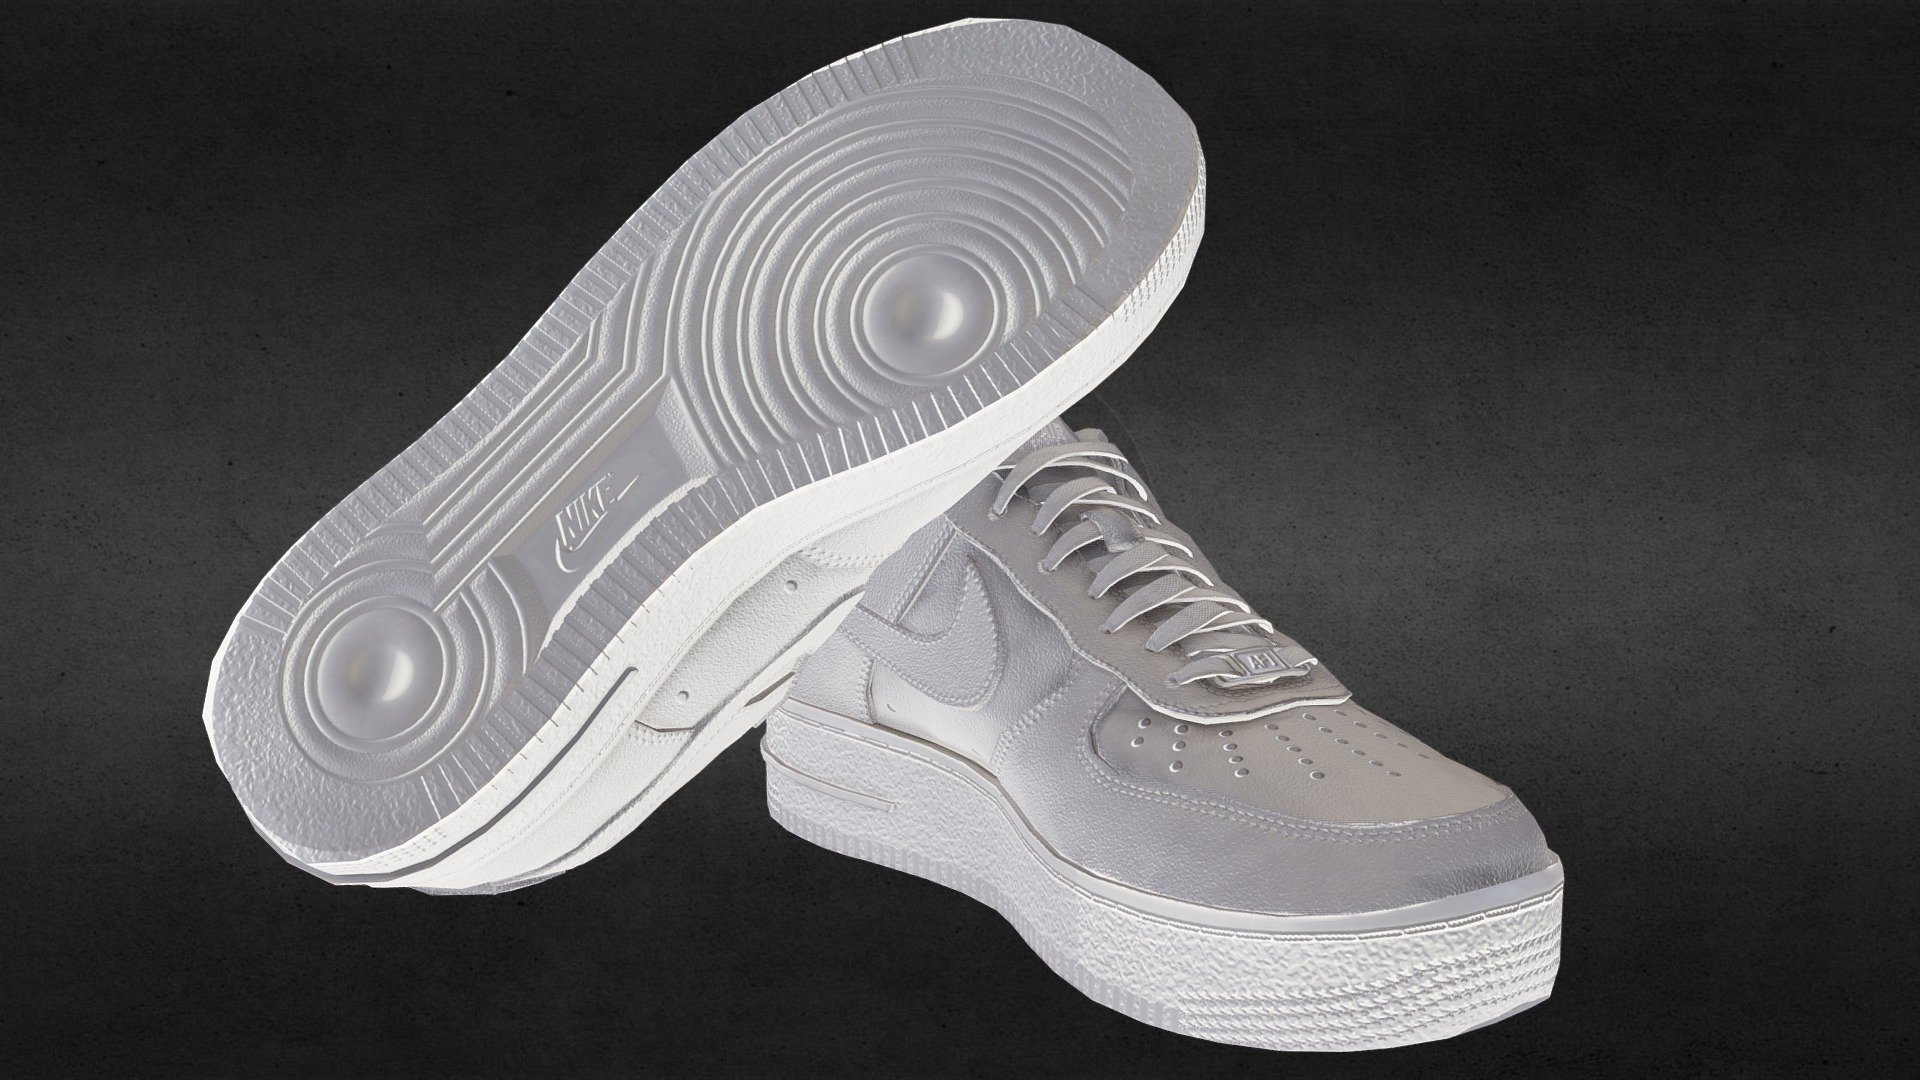 A pair of iconic Nike Air Force 1 sneakers. This model is optimized for game and/or vr, it has PBR textures.
Modeled in Blender and textured with Substance Painter 3d model